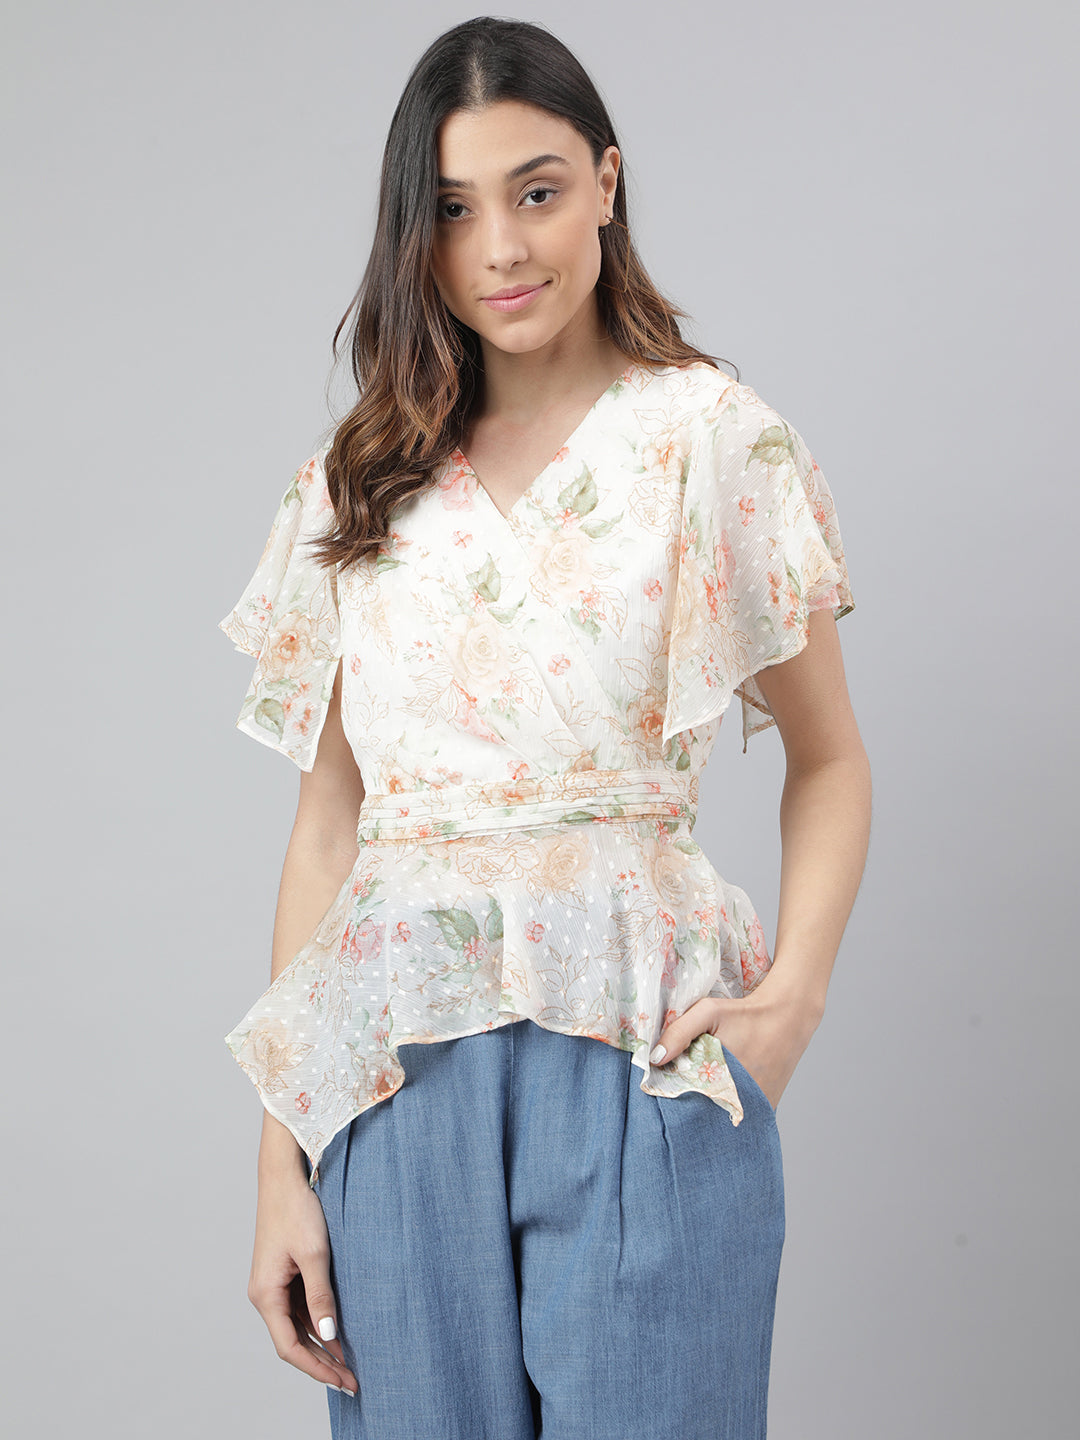 Ivory Half Sleeve V-Neck Floral Print Women Blouse Top For Casual